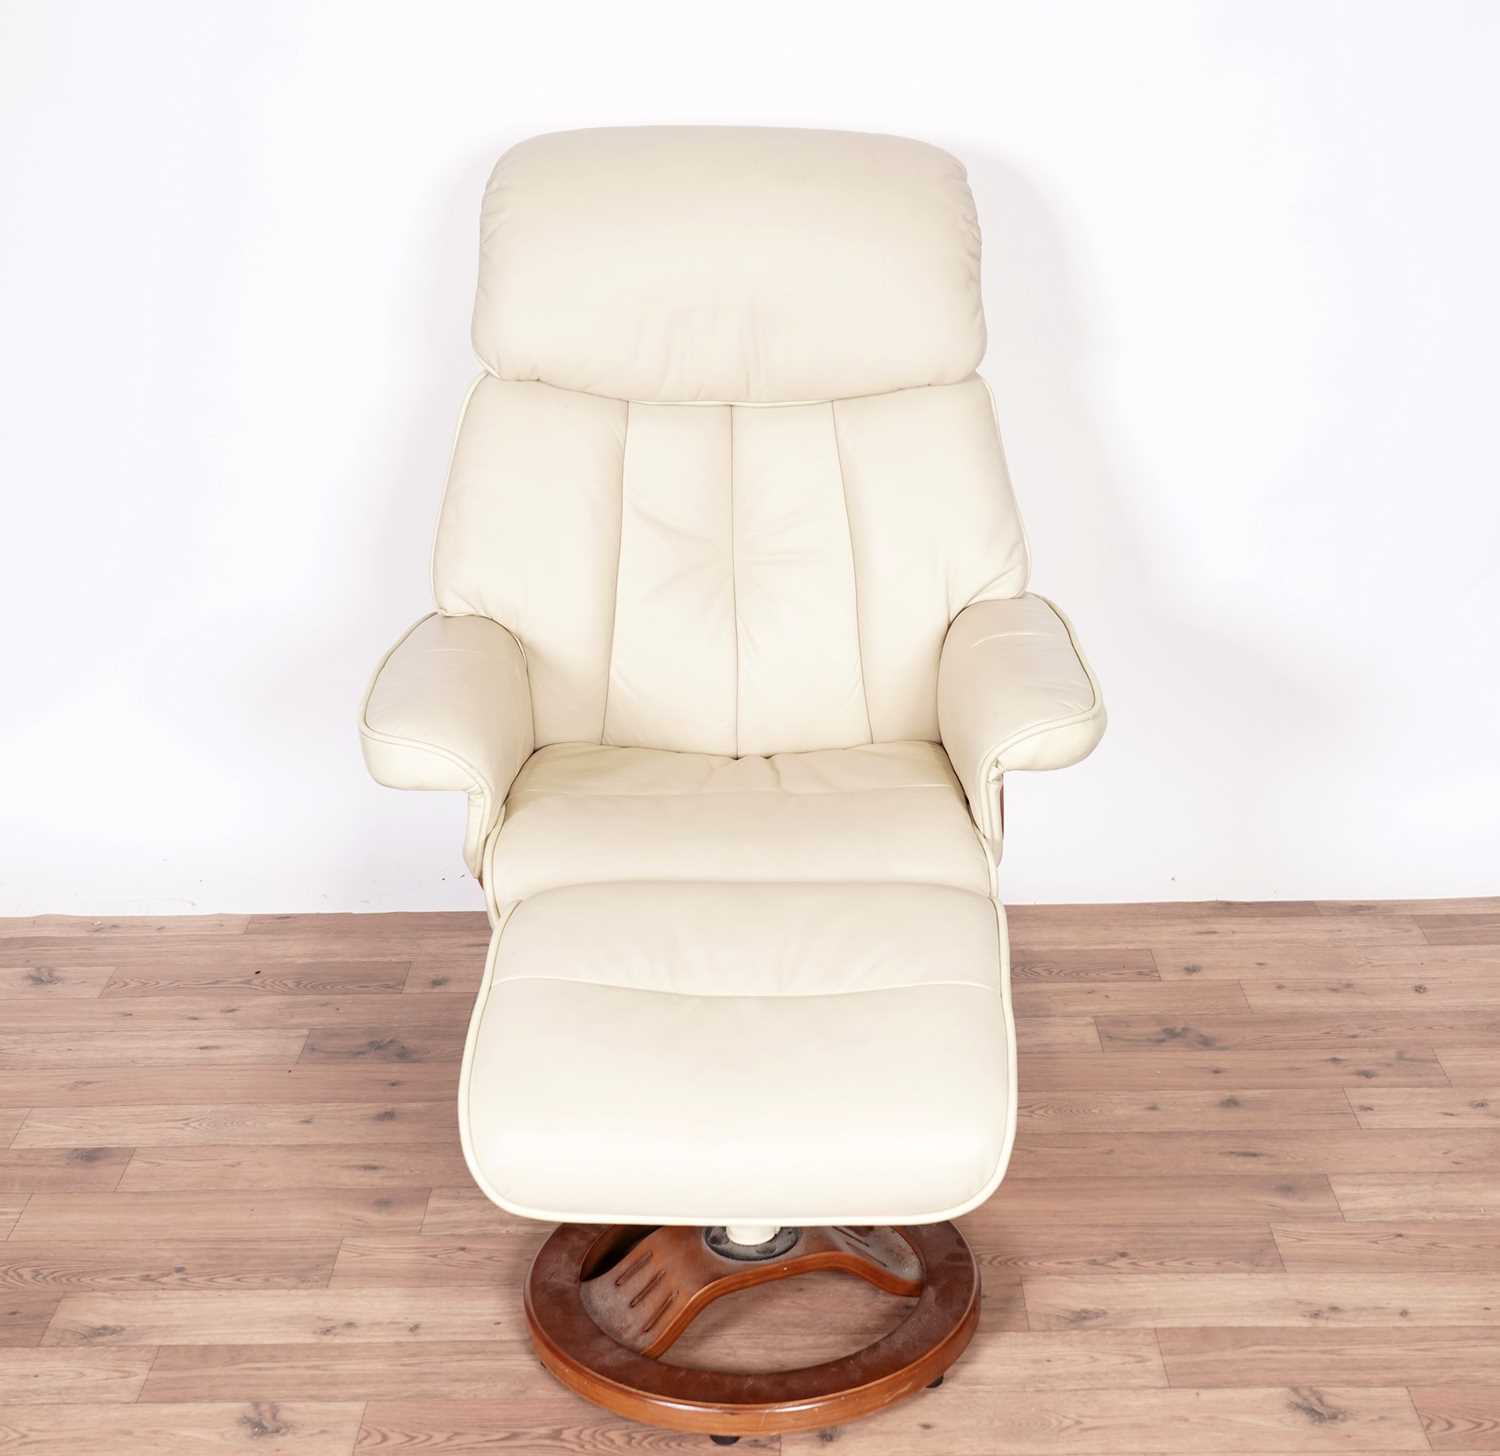 A leather reclining armchair with matching footstool by Global Furniture Alliance - Image 2 of 3